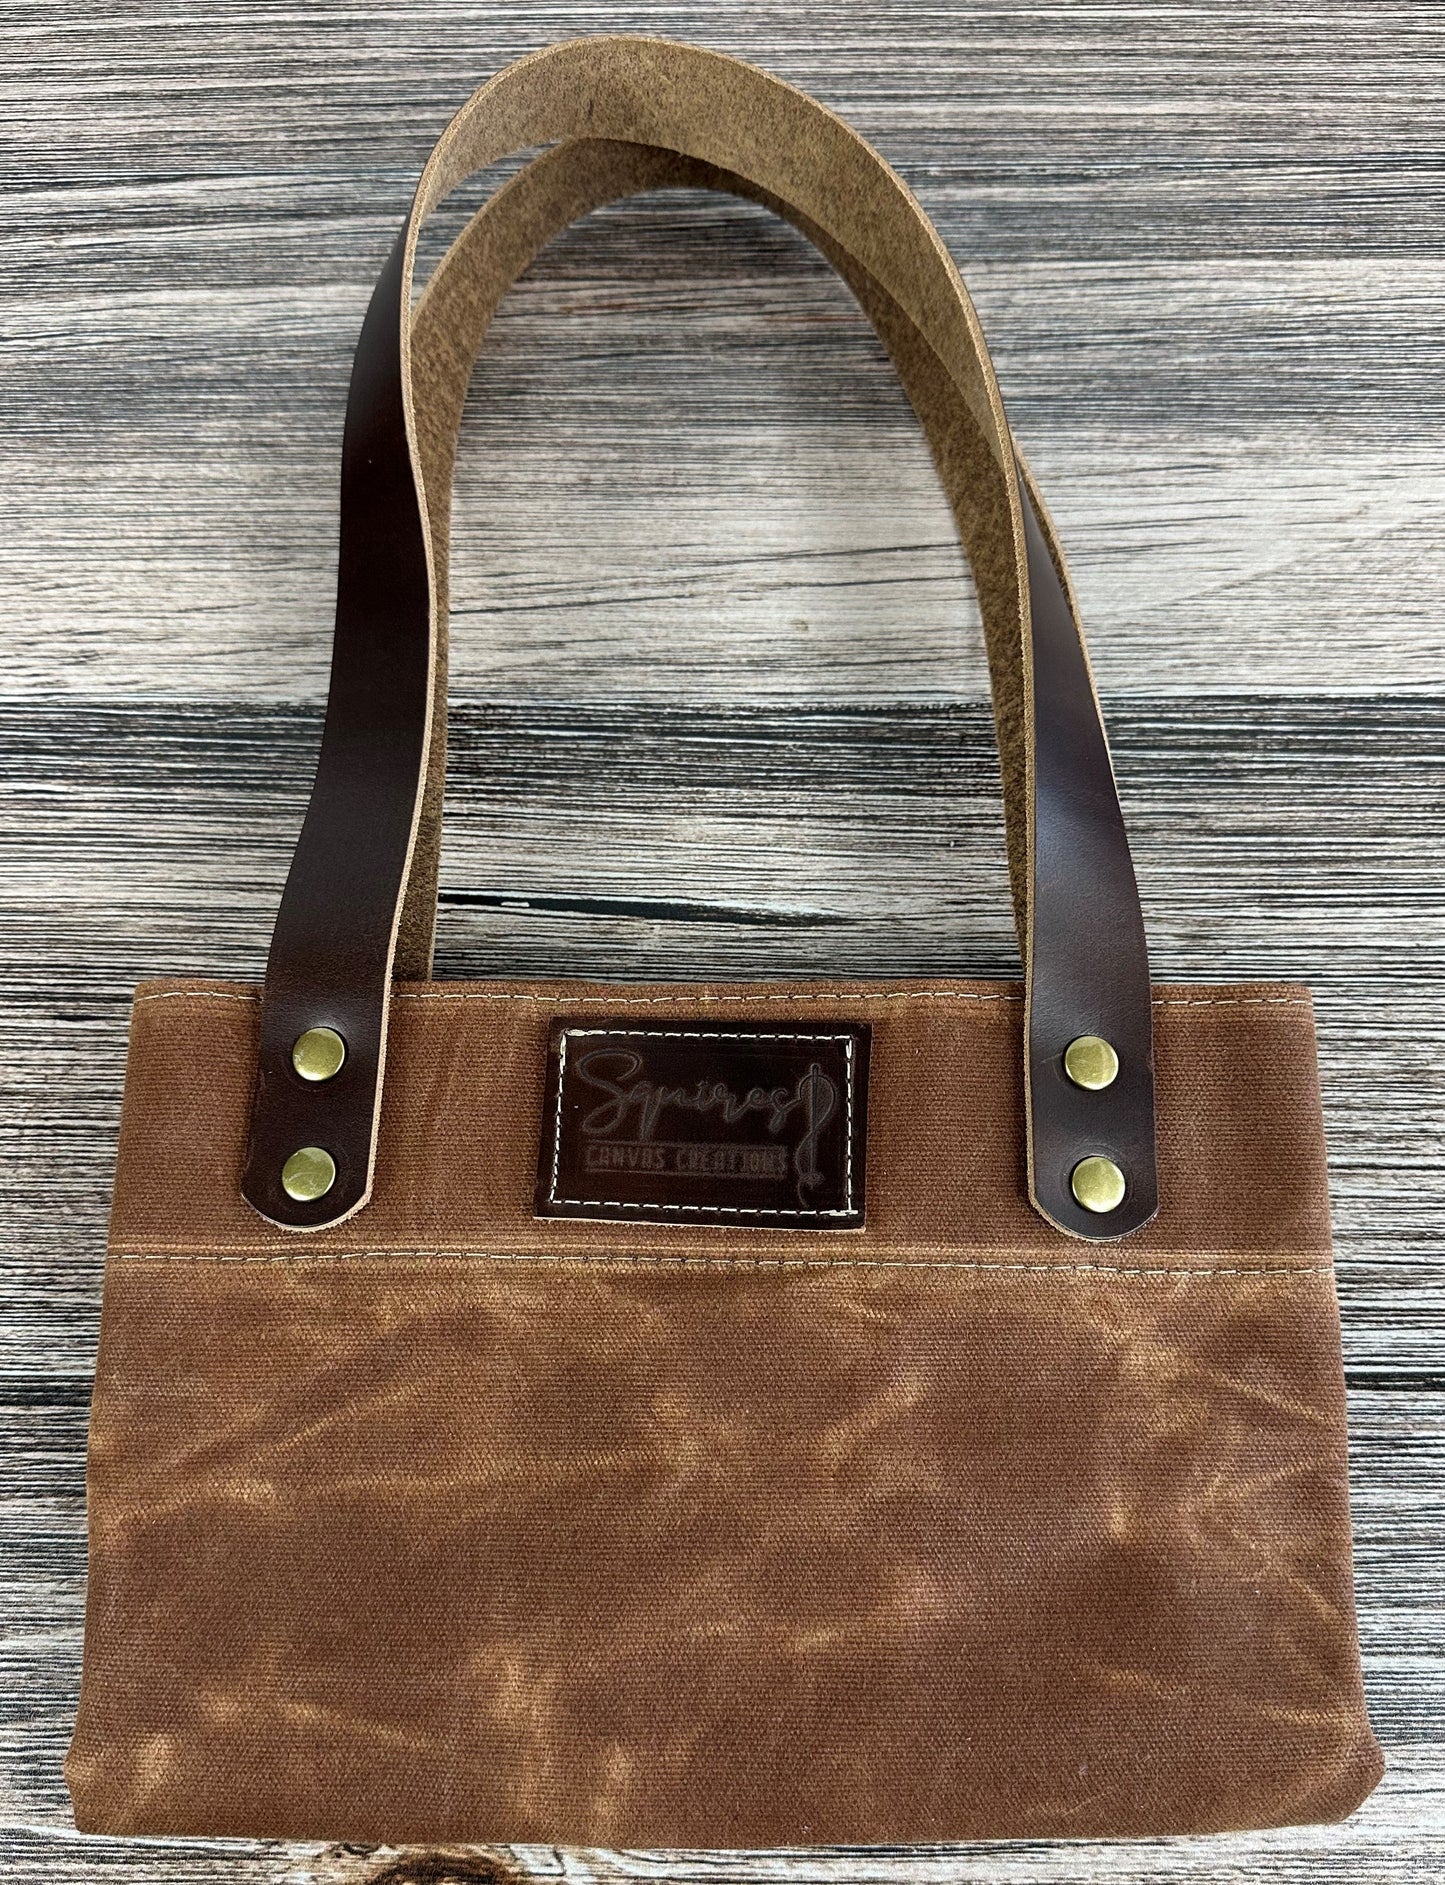 Saddle Waxed Canvas Wheat Leather with Antique Brass Hardware Chesapeake Market Tote squirescanvascreations